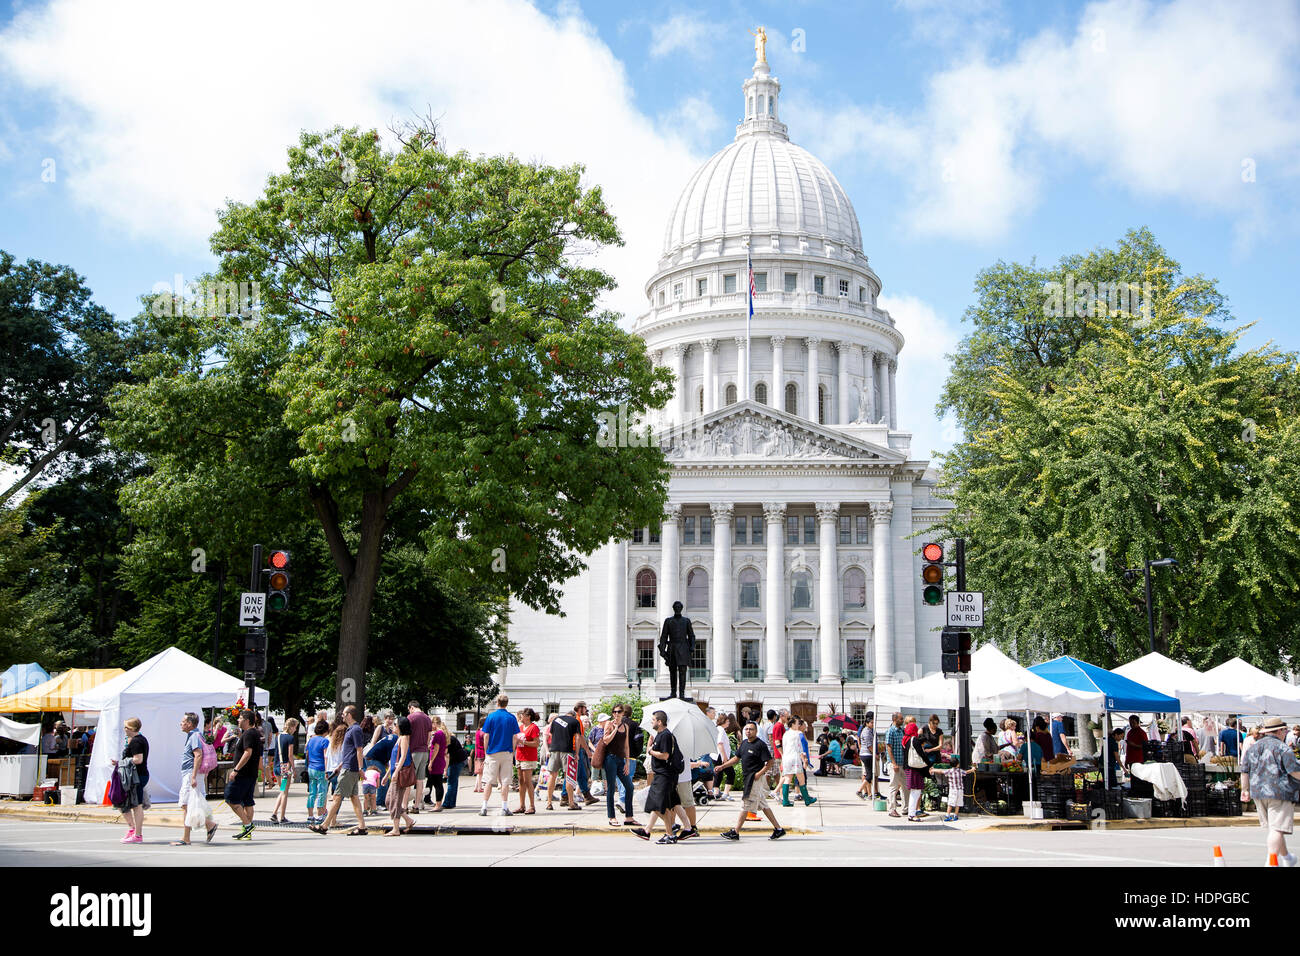 The Wisconsin State Capital Building stands in the center of the Madison Farmers' Market ion a summer afternoon. Stock Photo